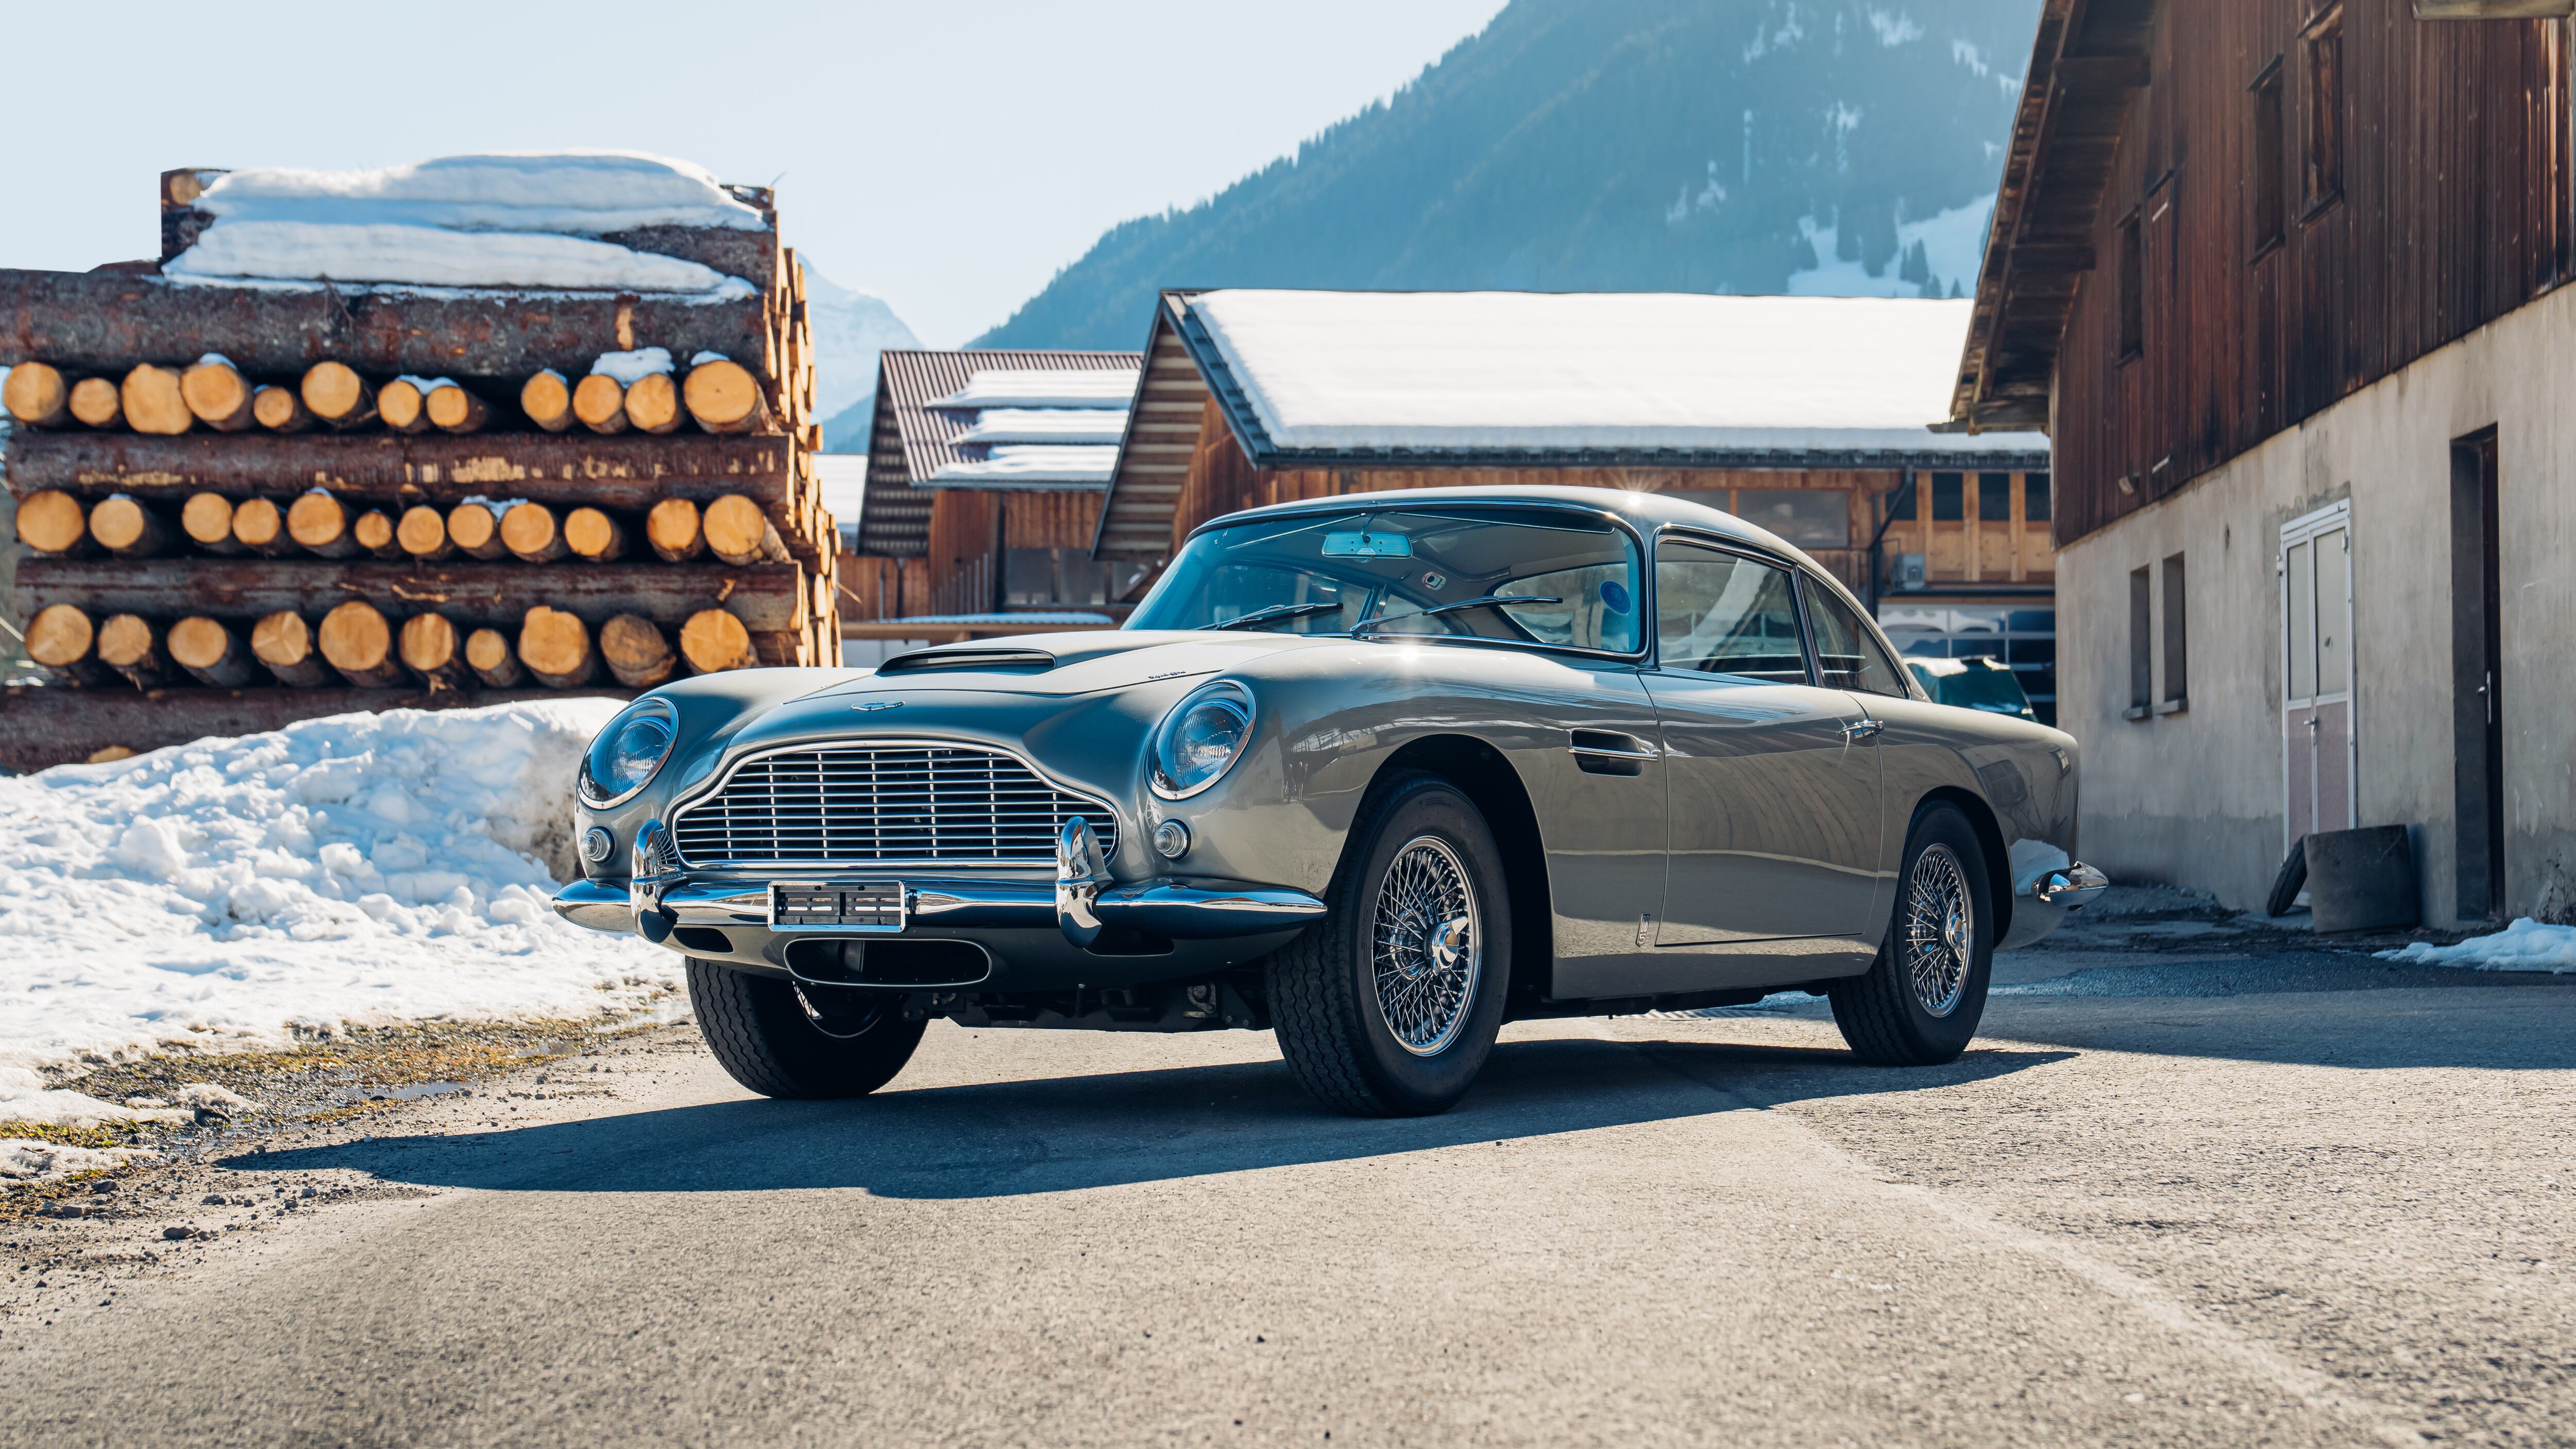 Cars like the Aston Martin DB5 are part of some of Britain’s motoring heritage.